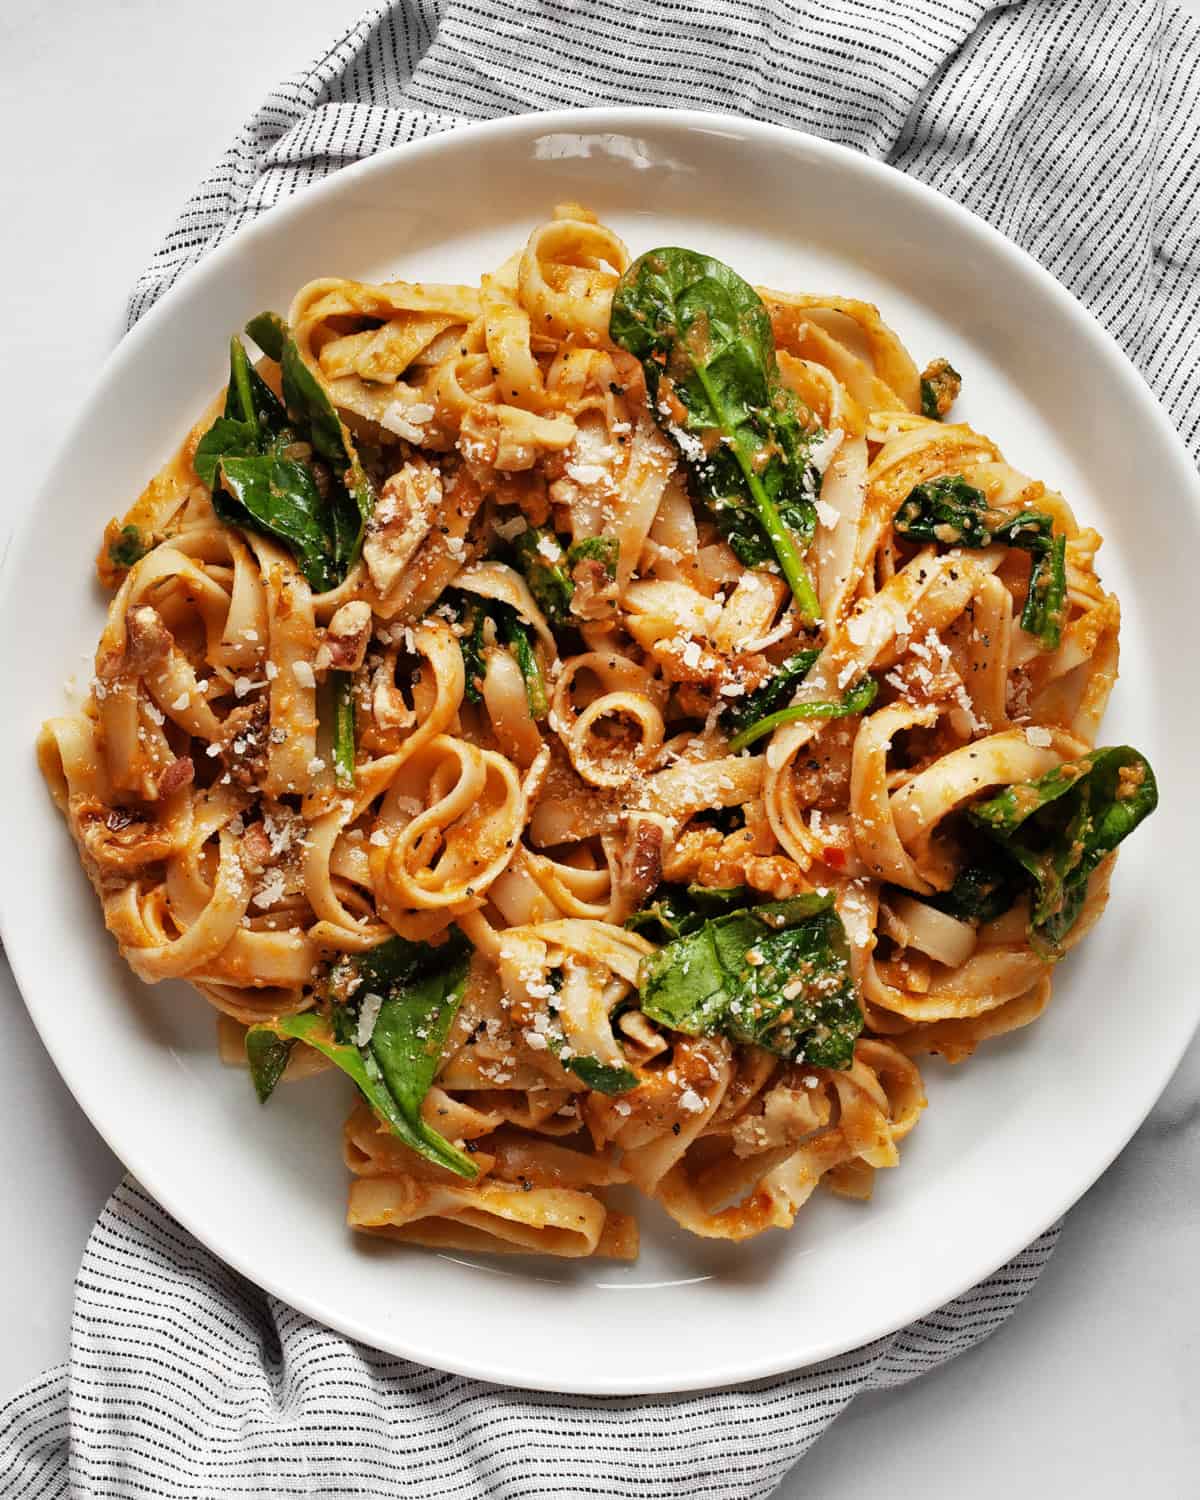 Pumpkin pasta with spinach, parmesan and walnuts on a plate.